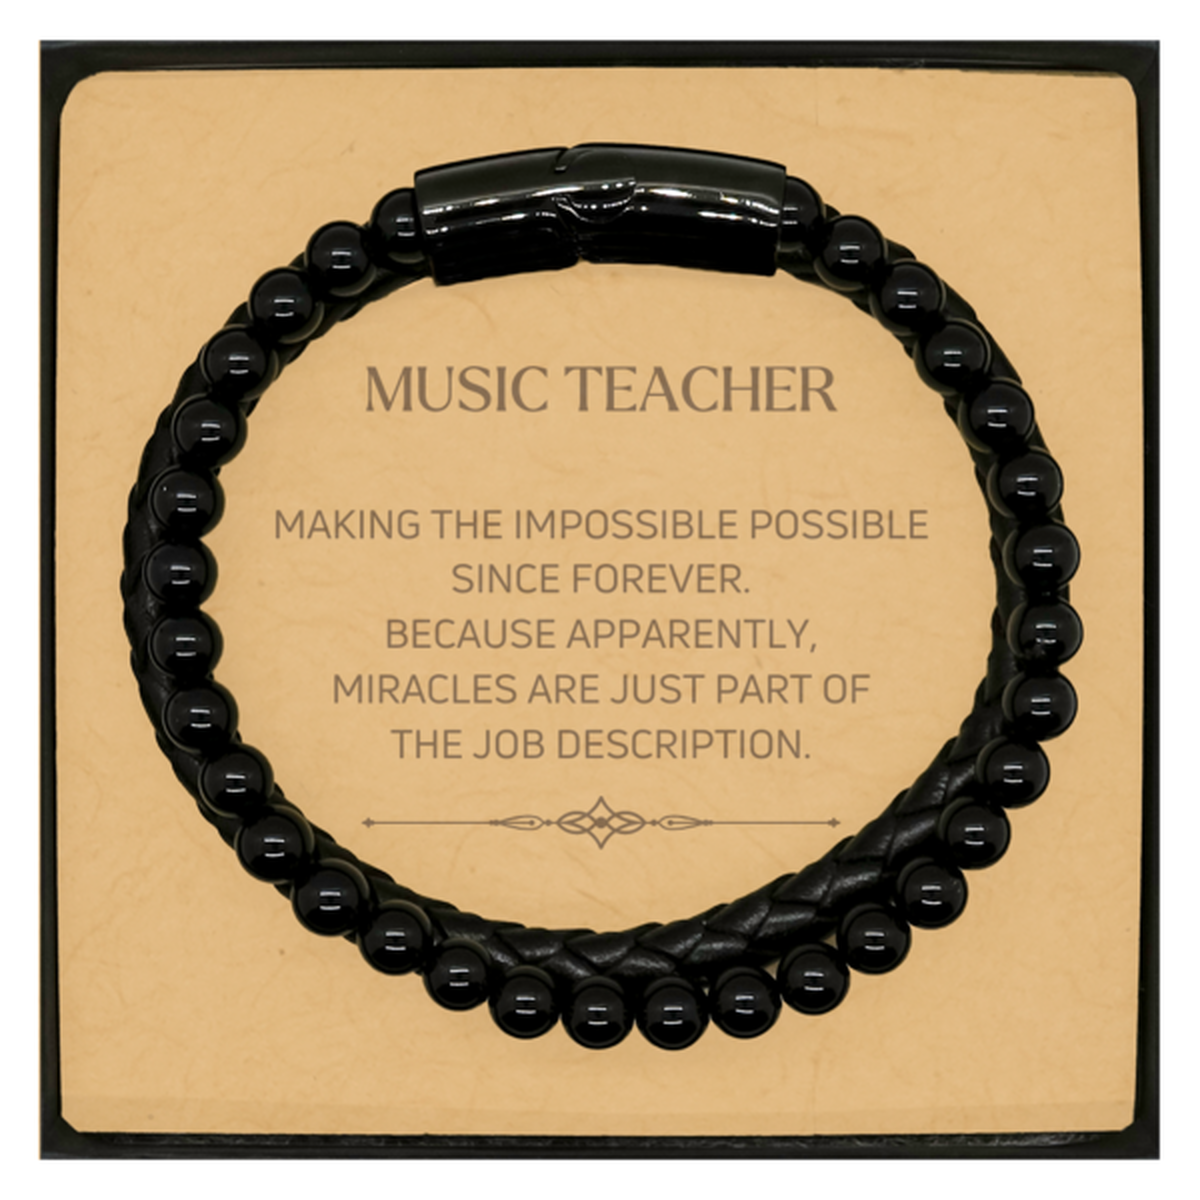 Funny Music Teacher Gifts, Miracles are just part of the job description, Inspirational Birthday Christmas Stone Leather Bracelets For Music Teacher, Men, Women, Coworkers, Friends, Boss